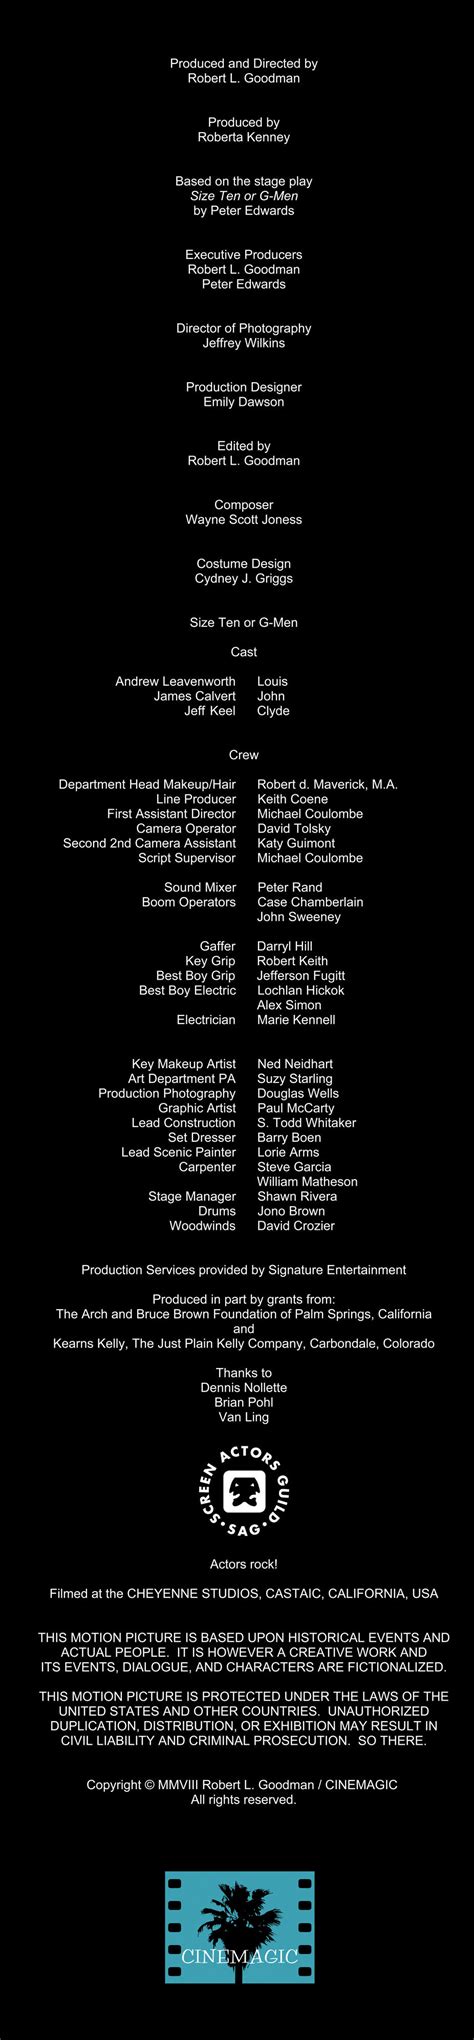 Take a Second lyrics credits, cast, crew of song